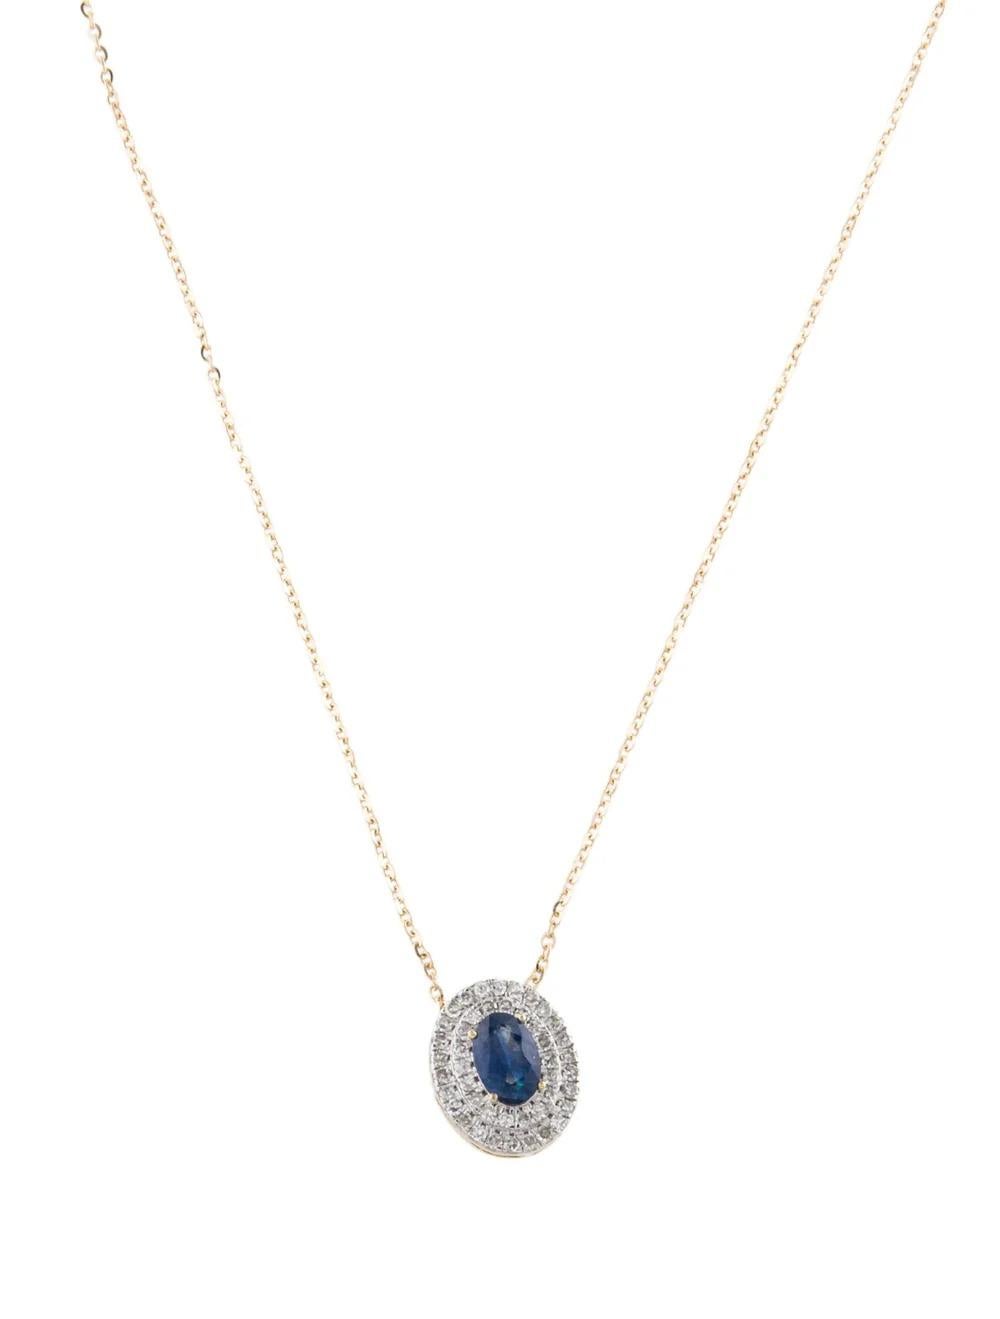 Elevate your style with this exquisite 14K Yellow Gold pendant necklace, showcasing a captivating 0.62 Carat Faceted Oval Sapphire complemented by shimmering diamond accents.

SPECIFICATIONS:

* Metal Type: 14K Yellow Gold
* Total Item Weight: